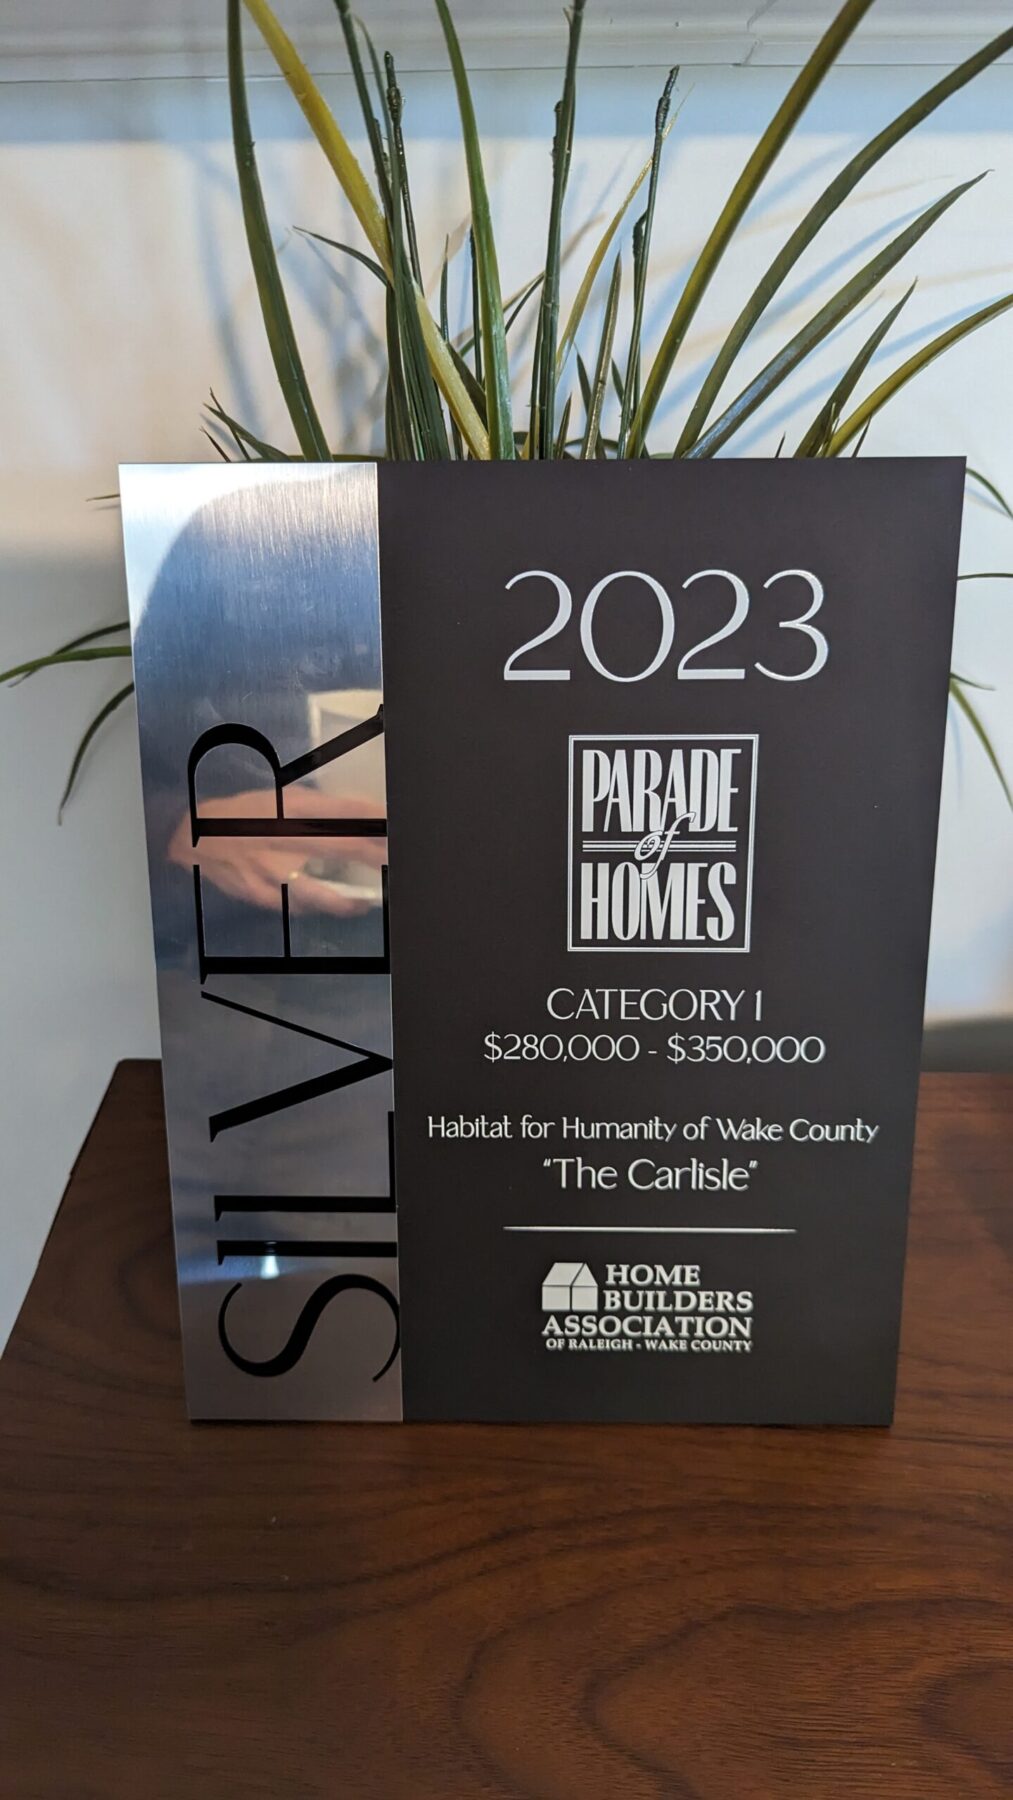 Habitat Wake received the Silver Award for their price category!